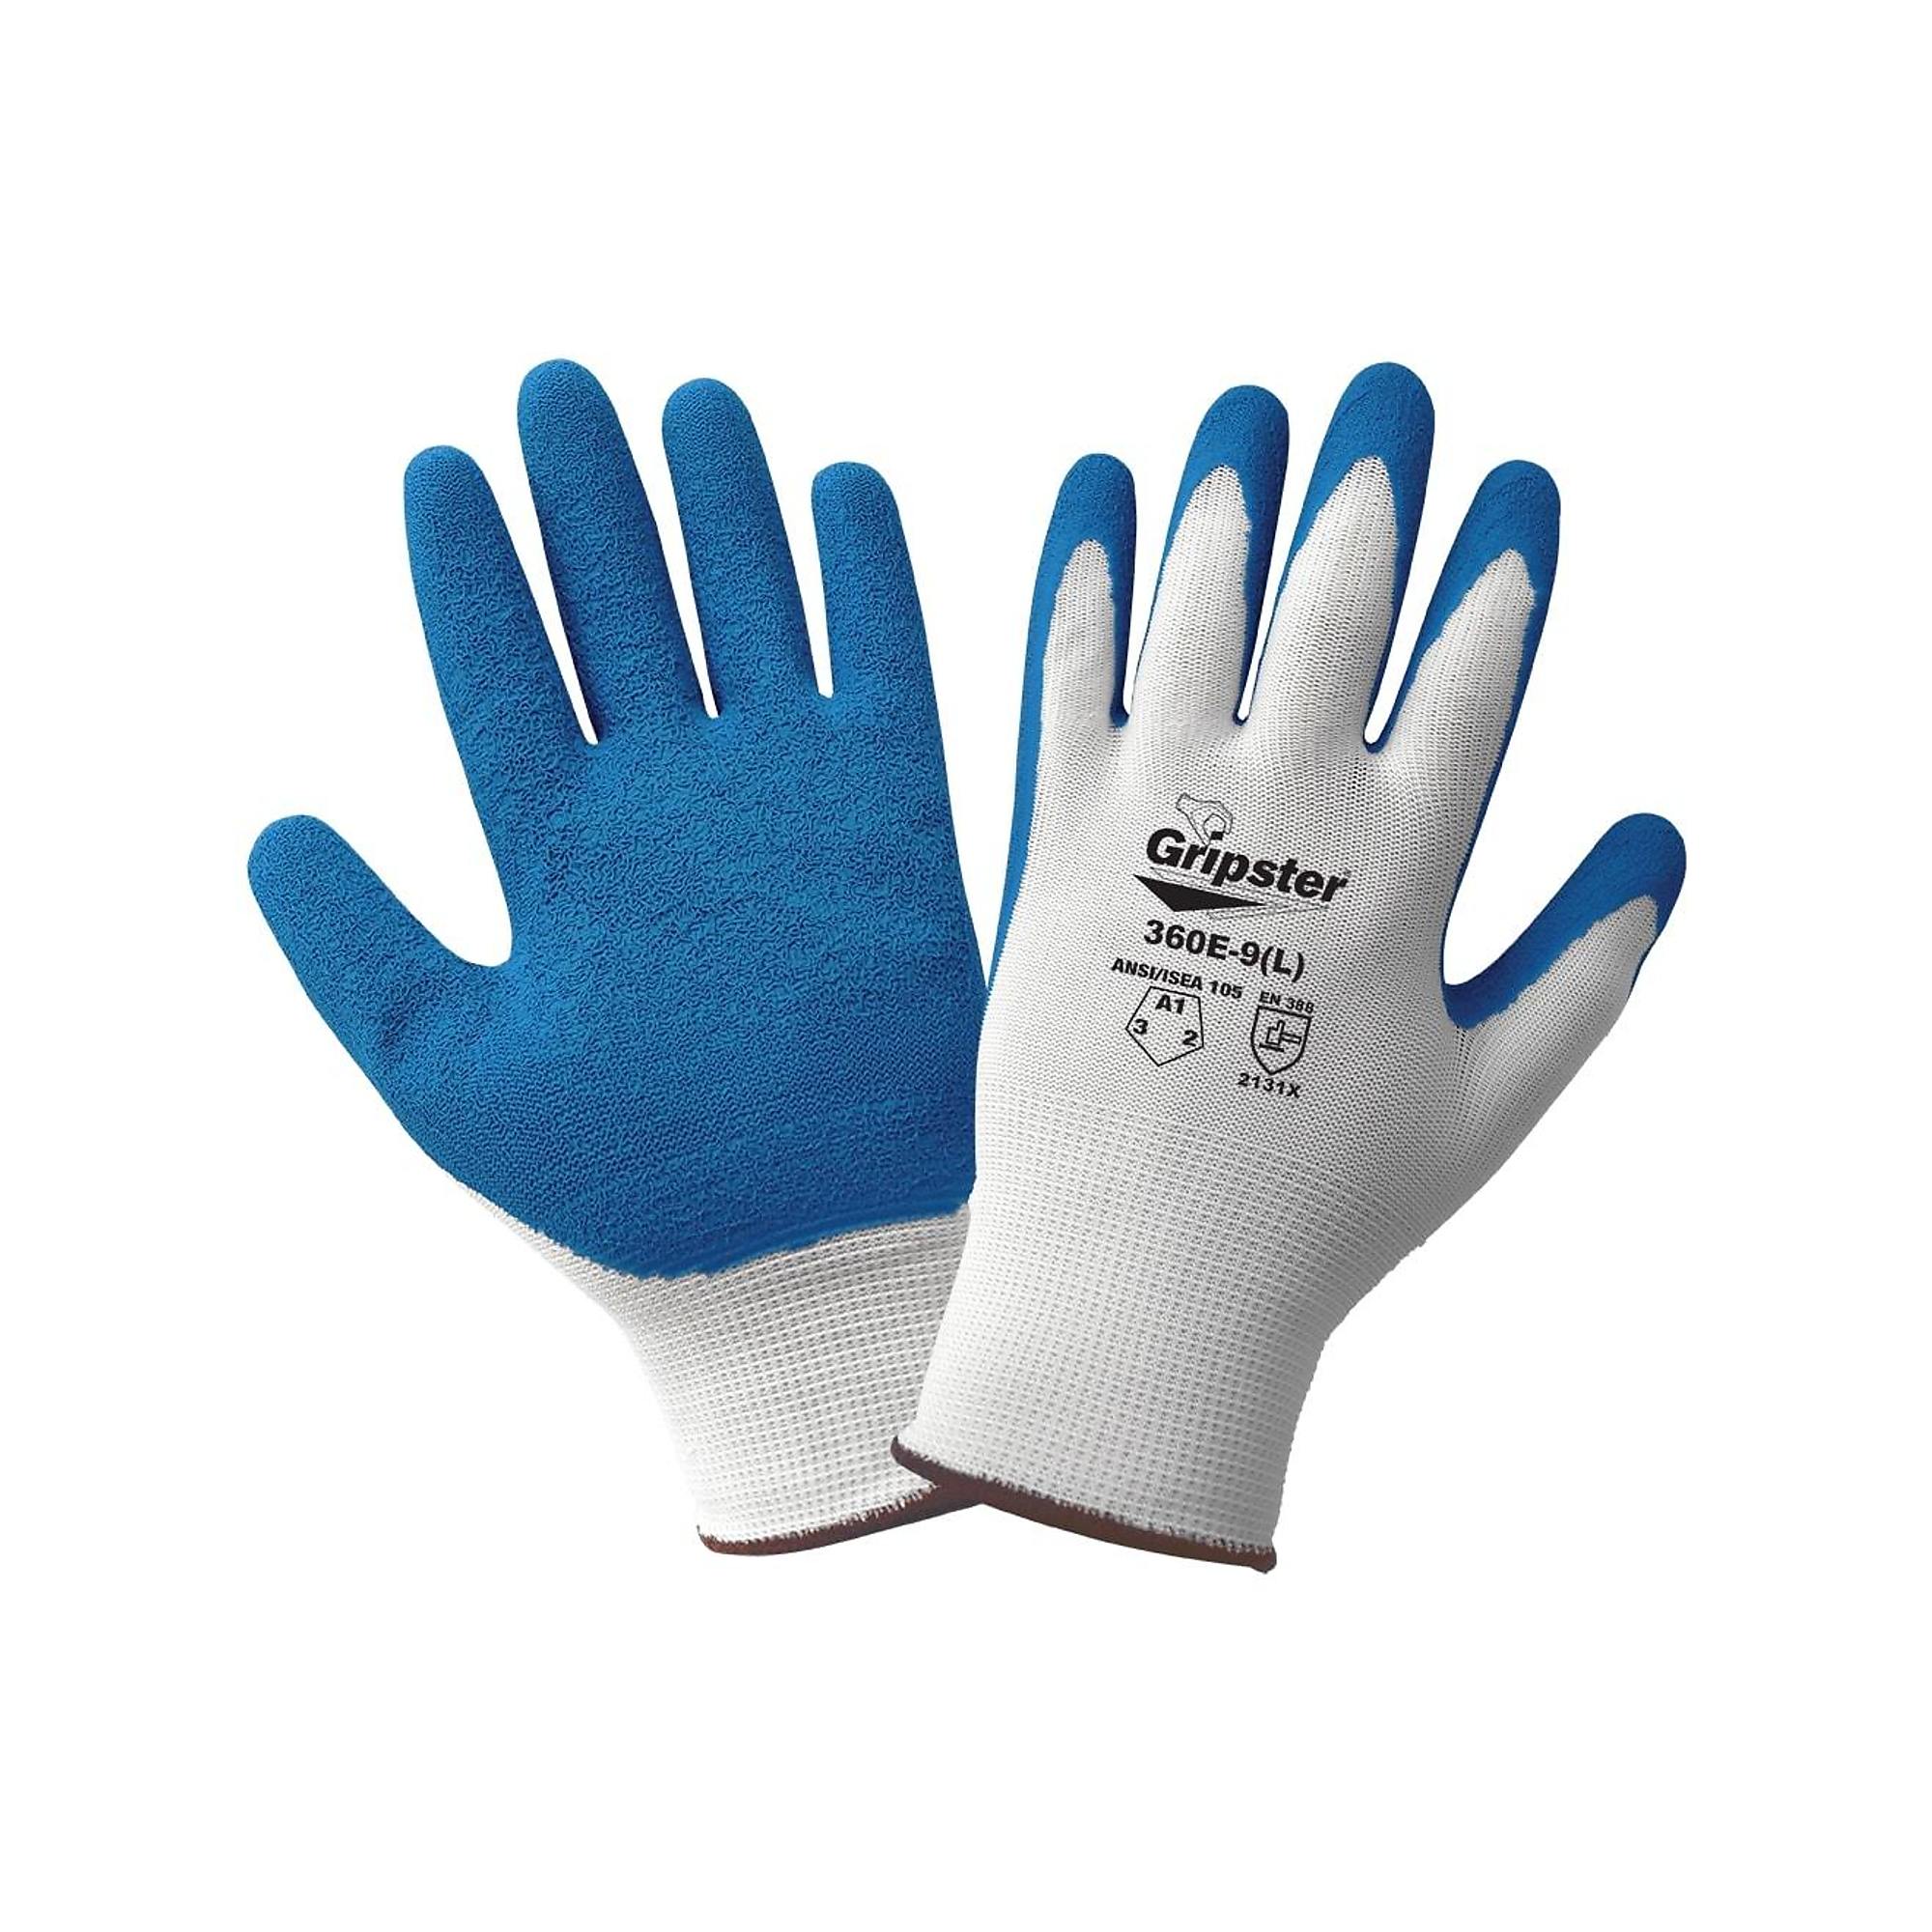 Global Glove Gripster , White, Blue Rub Coated, Cut Resistant A1 Gloves - 12 Pairs, Size S, Color White/Blue, Included (qty.) 12 Model 360E-7(S)